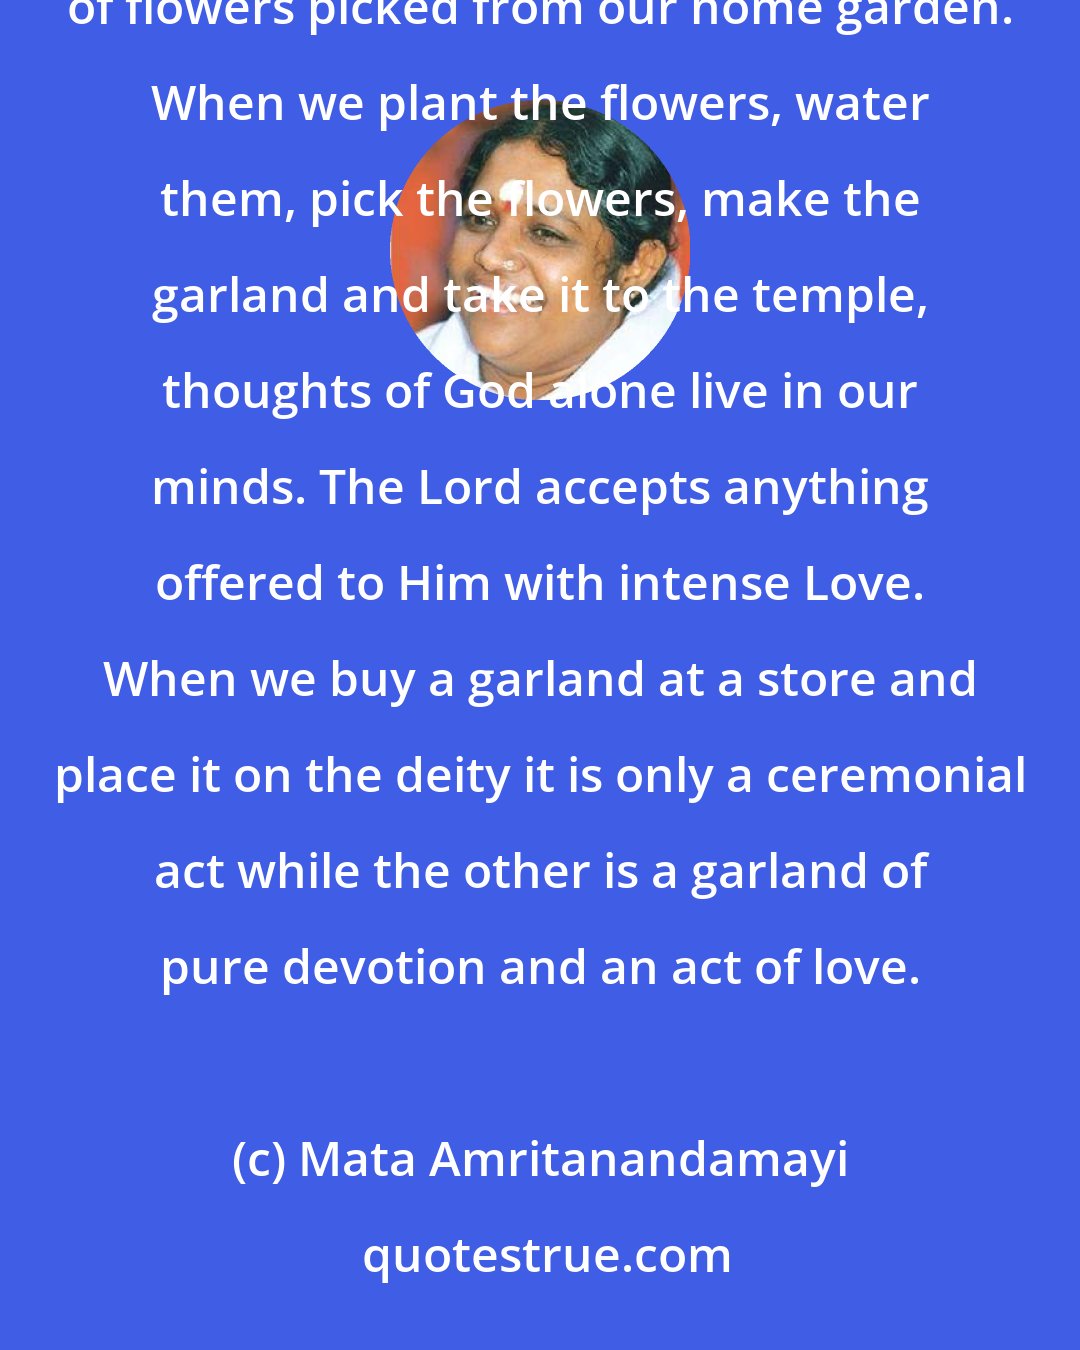 Mata Amritanandamayi: There is a lot of difference between offering a garland of flowers bought from a shop and one that we make out of flowers picked from our home garden. When we plant the flowers, water them, pick the flowers, make the garland and take it to the temple, thoughts of God alone live in our minds. The Lord accepts anything offered to Him with intense Love. When we buy a garland at a store and place it on the deity it is only a ceremonial act while the other is a garland of pure devotion and an act of love.